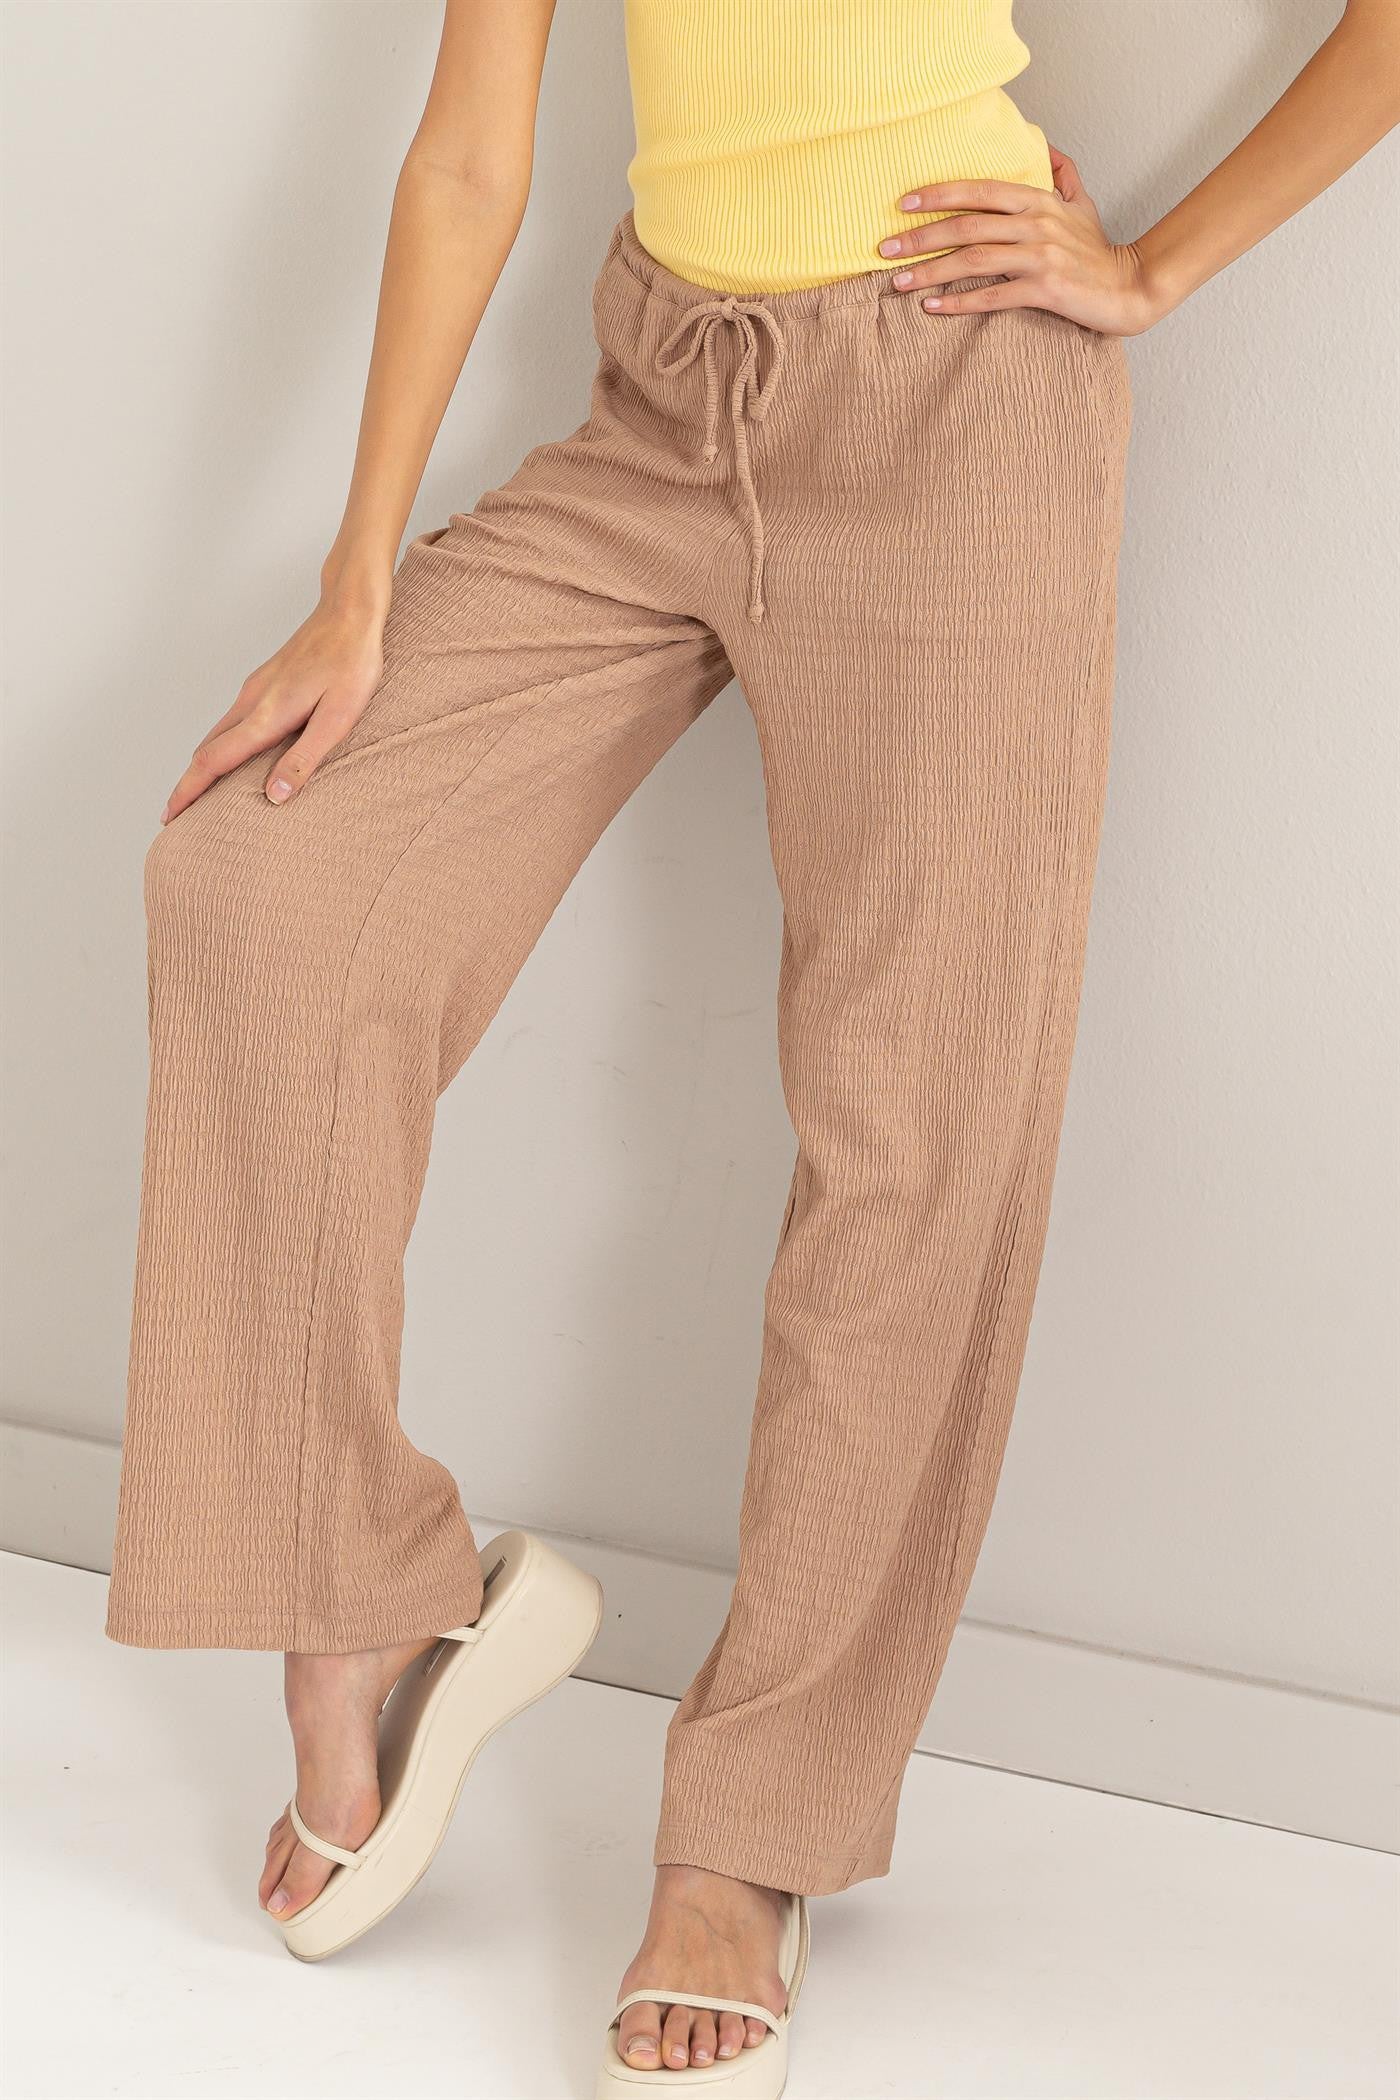 Alo Yoga  Cargo Venture Pants in Toffee Brown, Size: Small